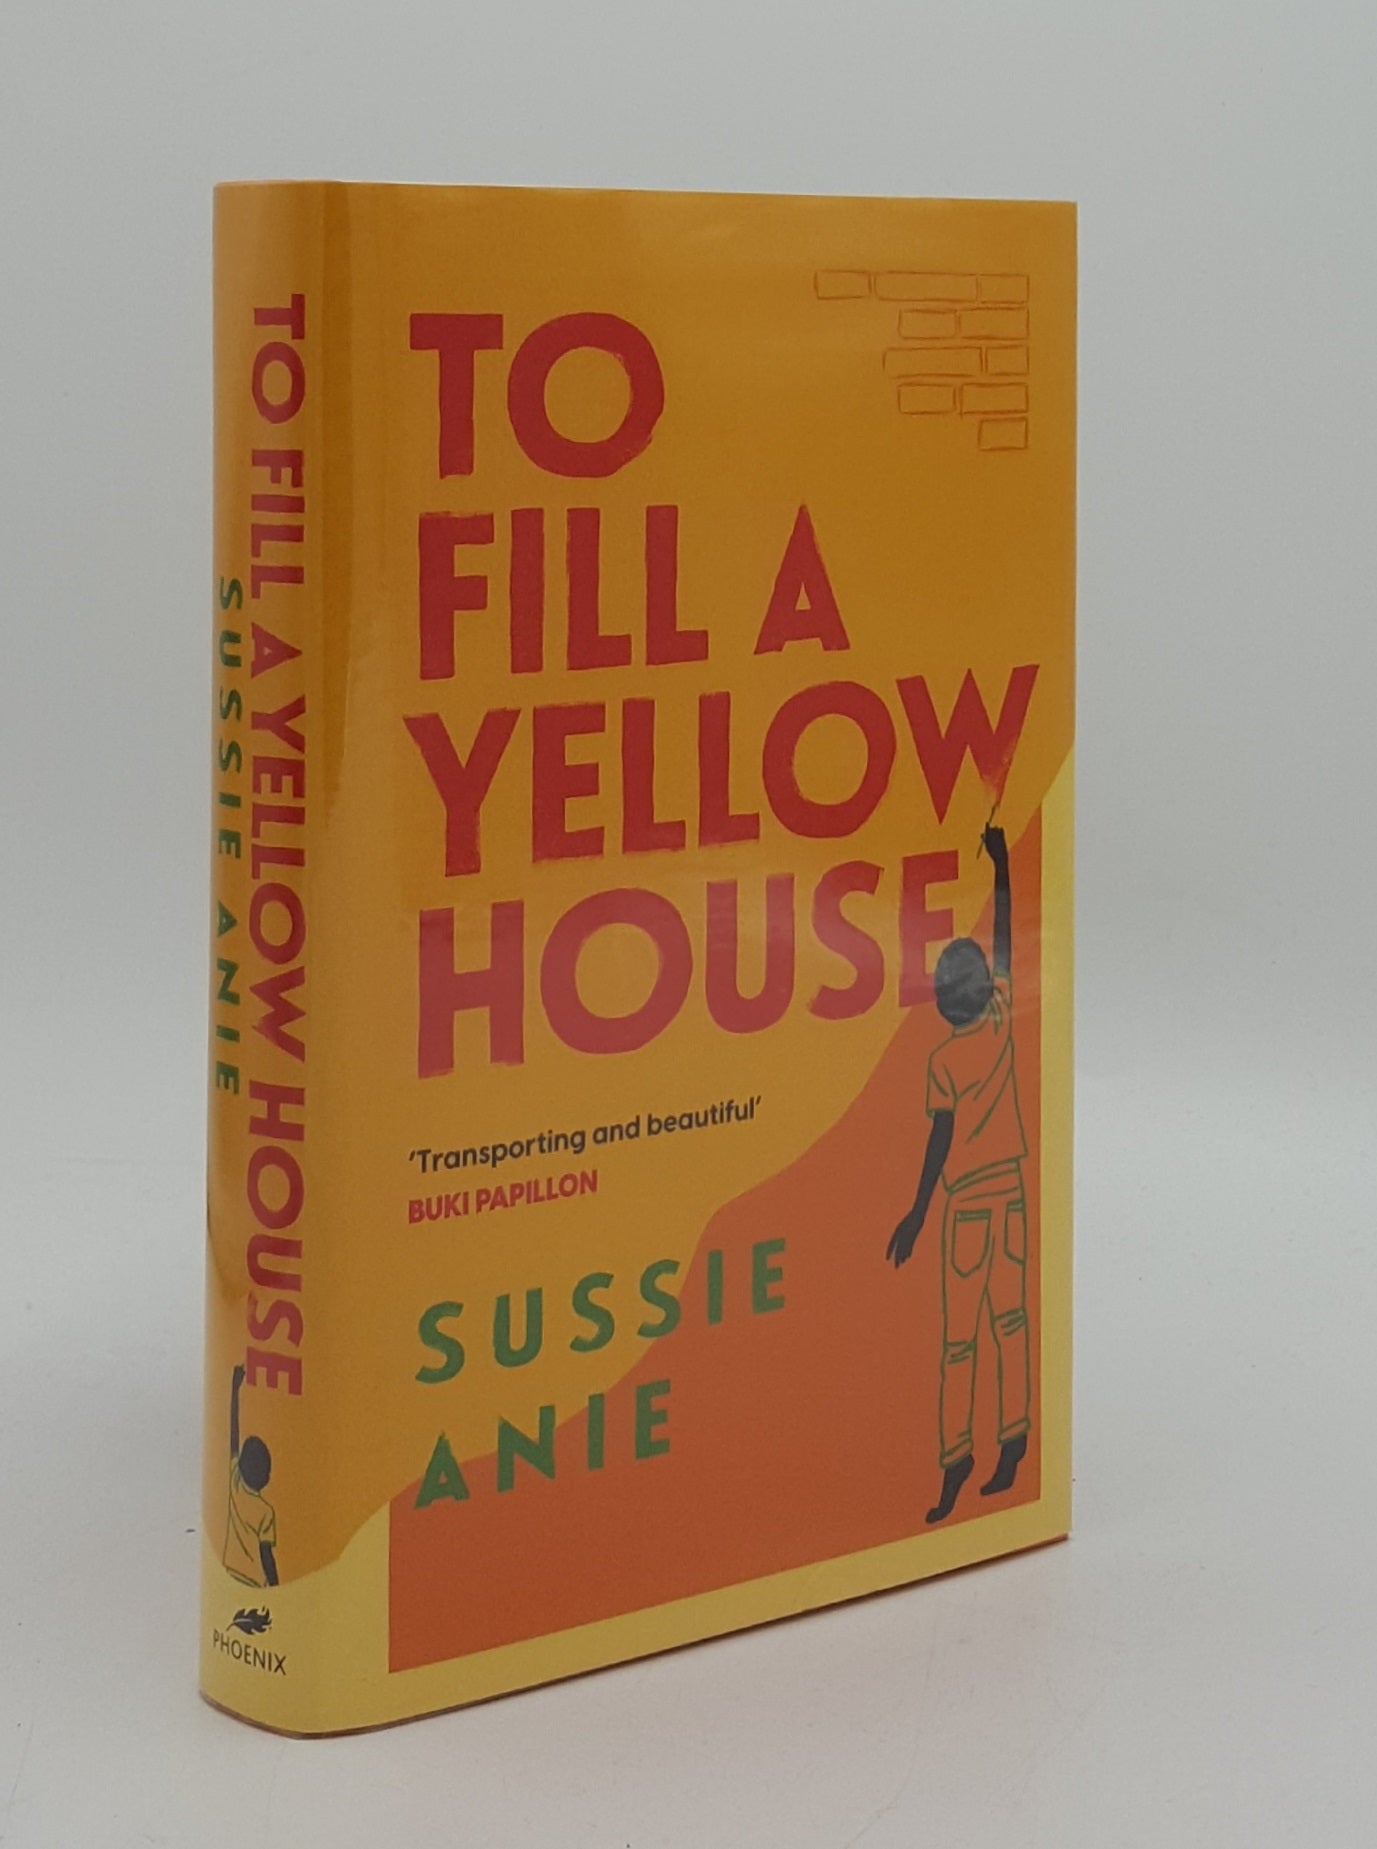 ANIE Sussie - To Fill a Yellow House